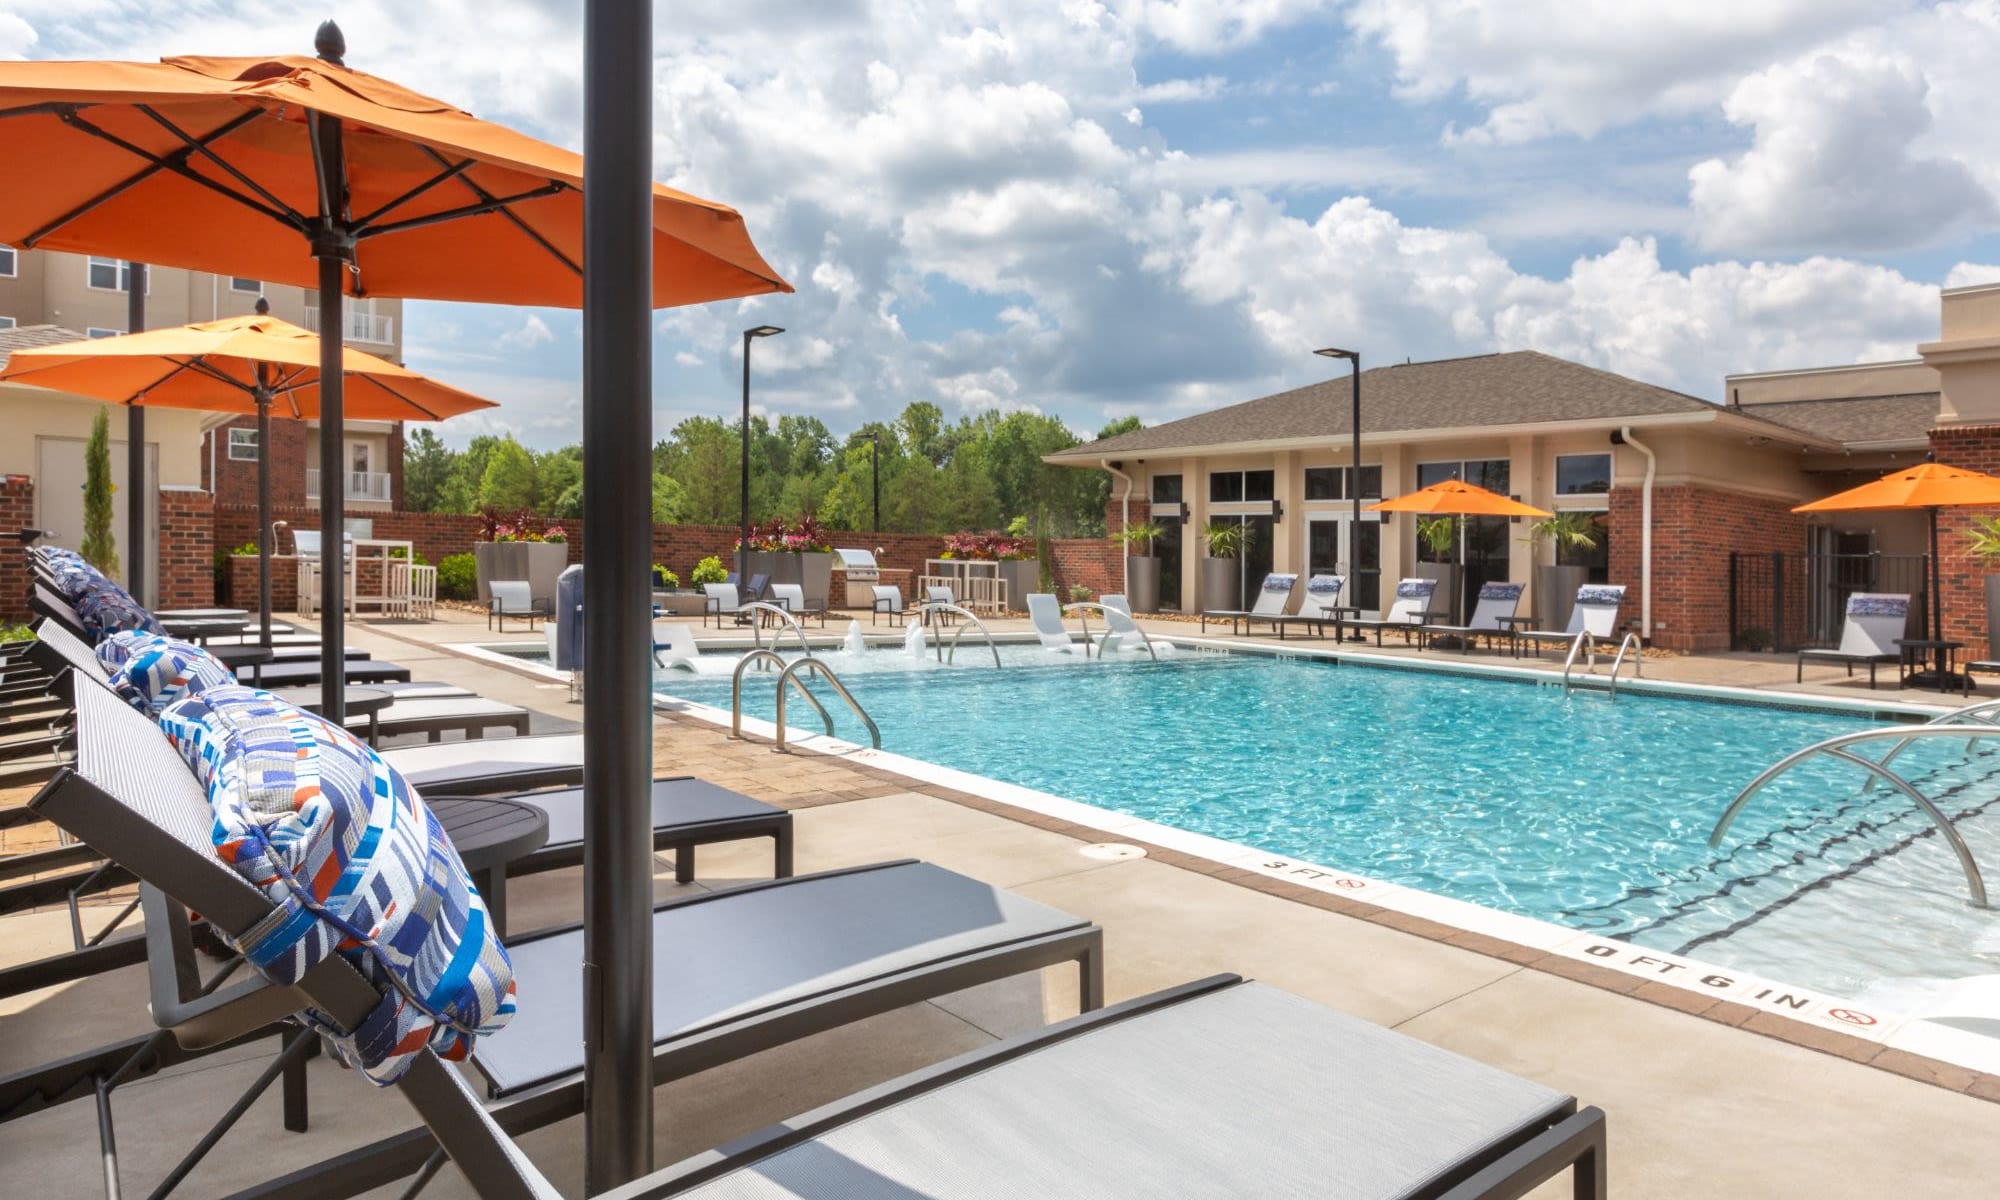 Apply to live at 8 Metro Station in Charlotte, North Carolina